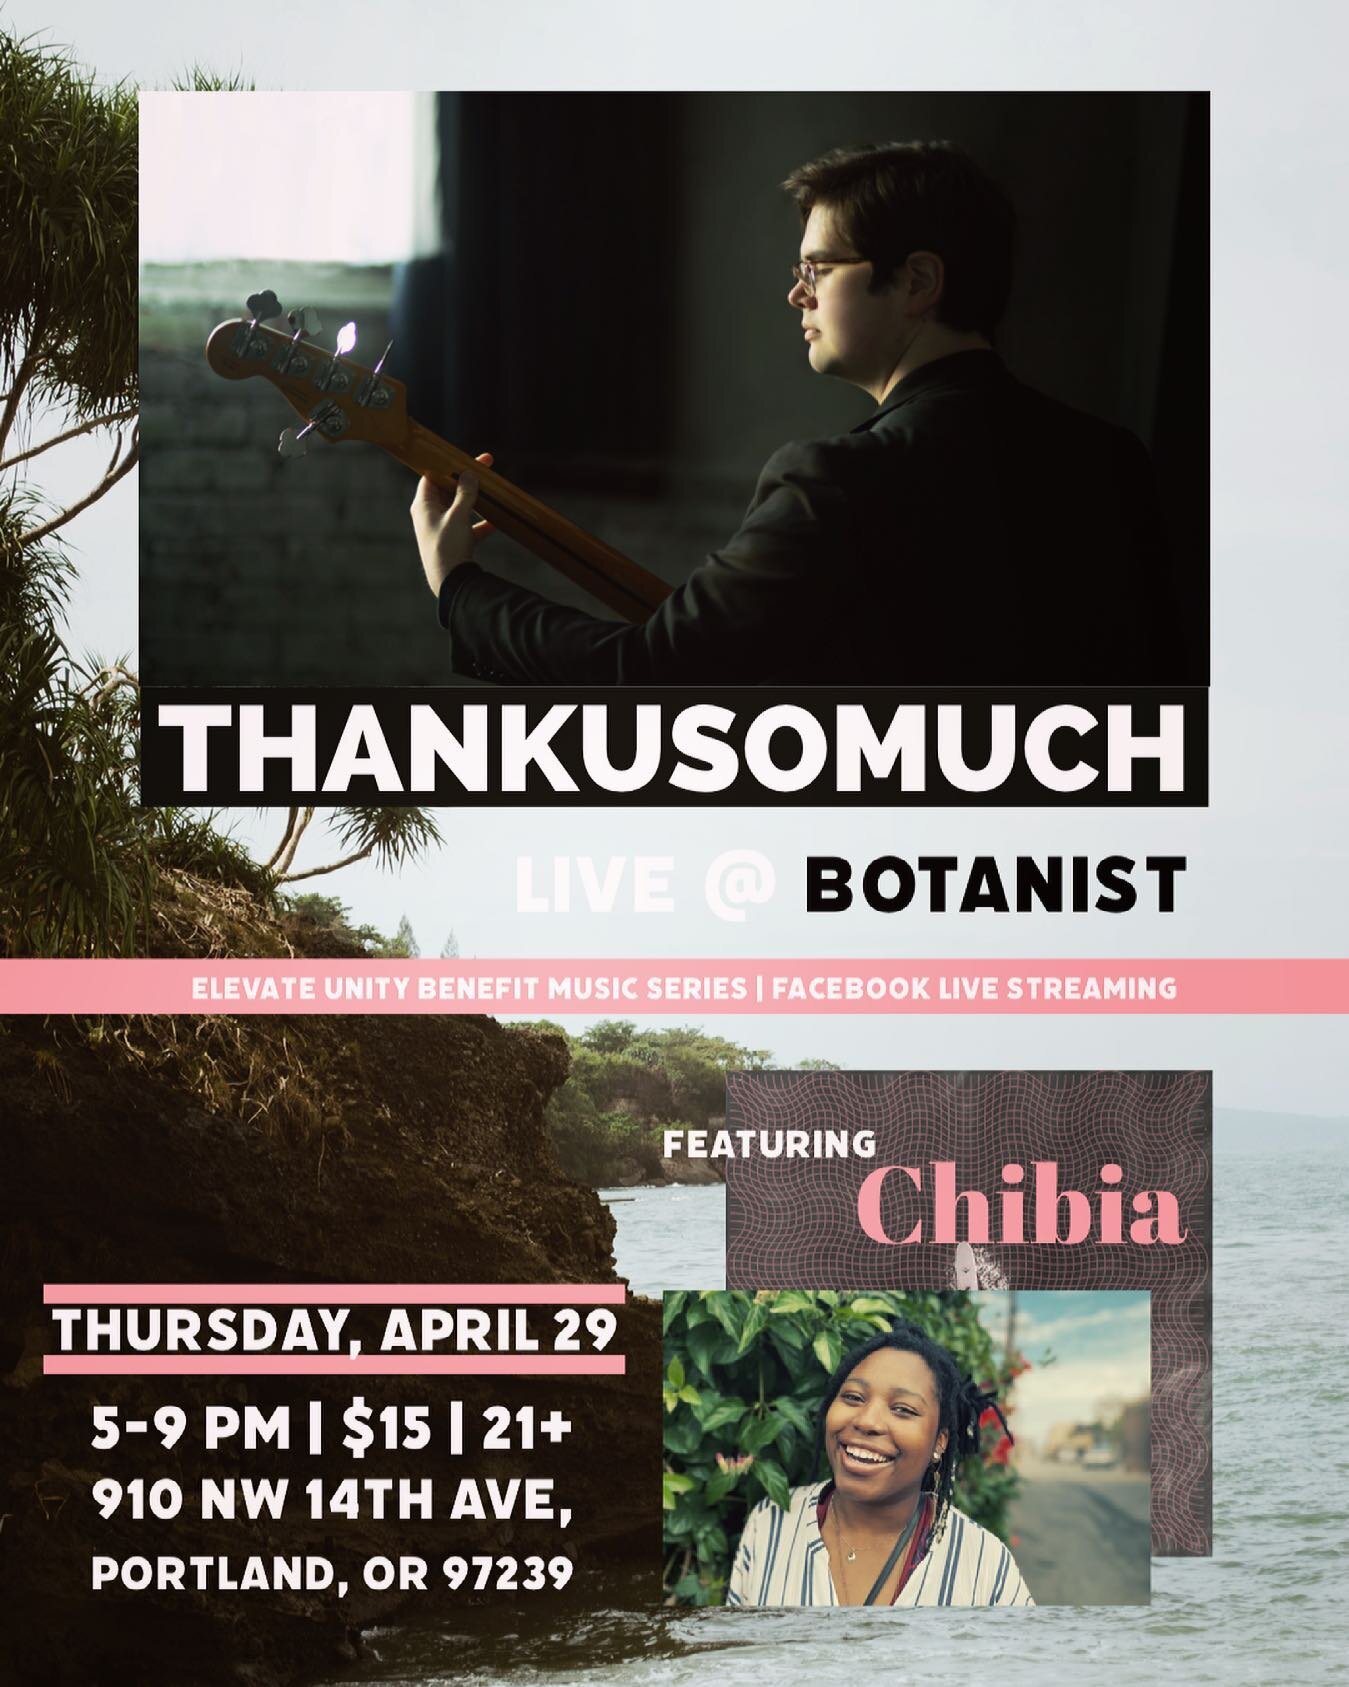 Thankusomuch is playing at @botanist_house for a real live show next Thursday! 

Join us on 4/29 at 5 PM in person (or via Facebook live) for an amazing performance featuring @paulparesa on keys, @michaelwiest on guitar, and Steven Skolnik on drums. 